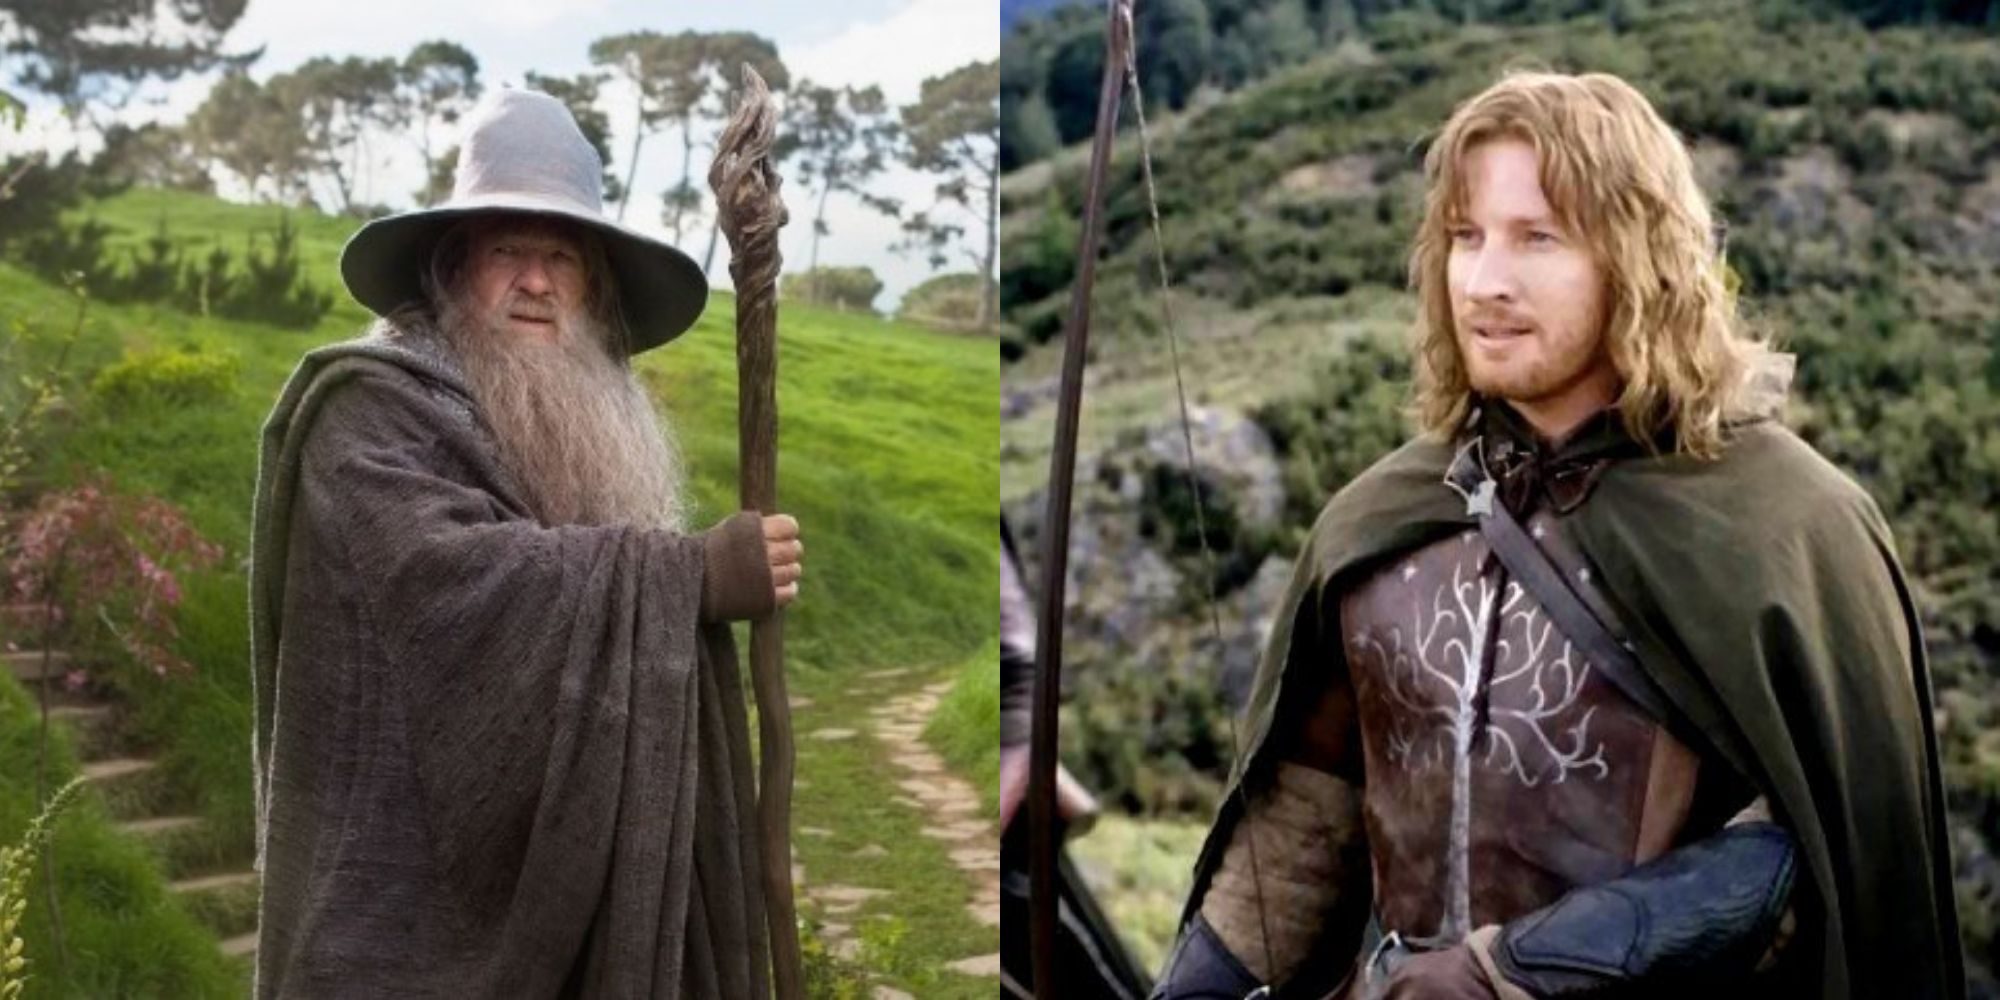 Split image showing Gandalf and Faramir in The Lord of the Rings.